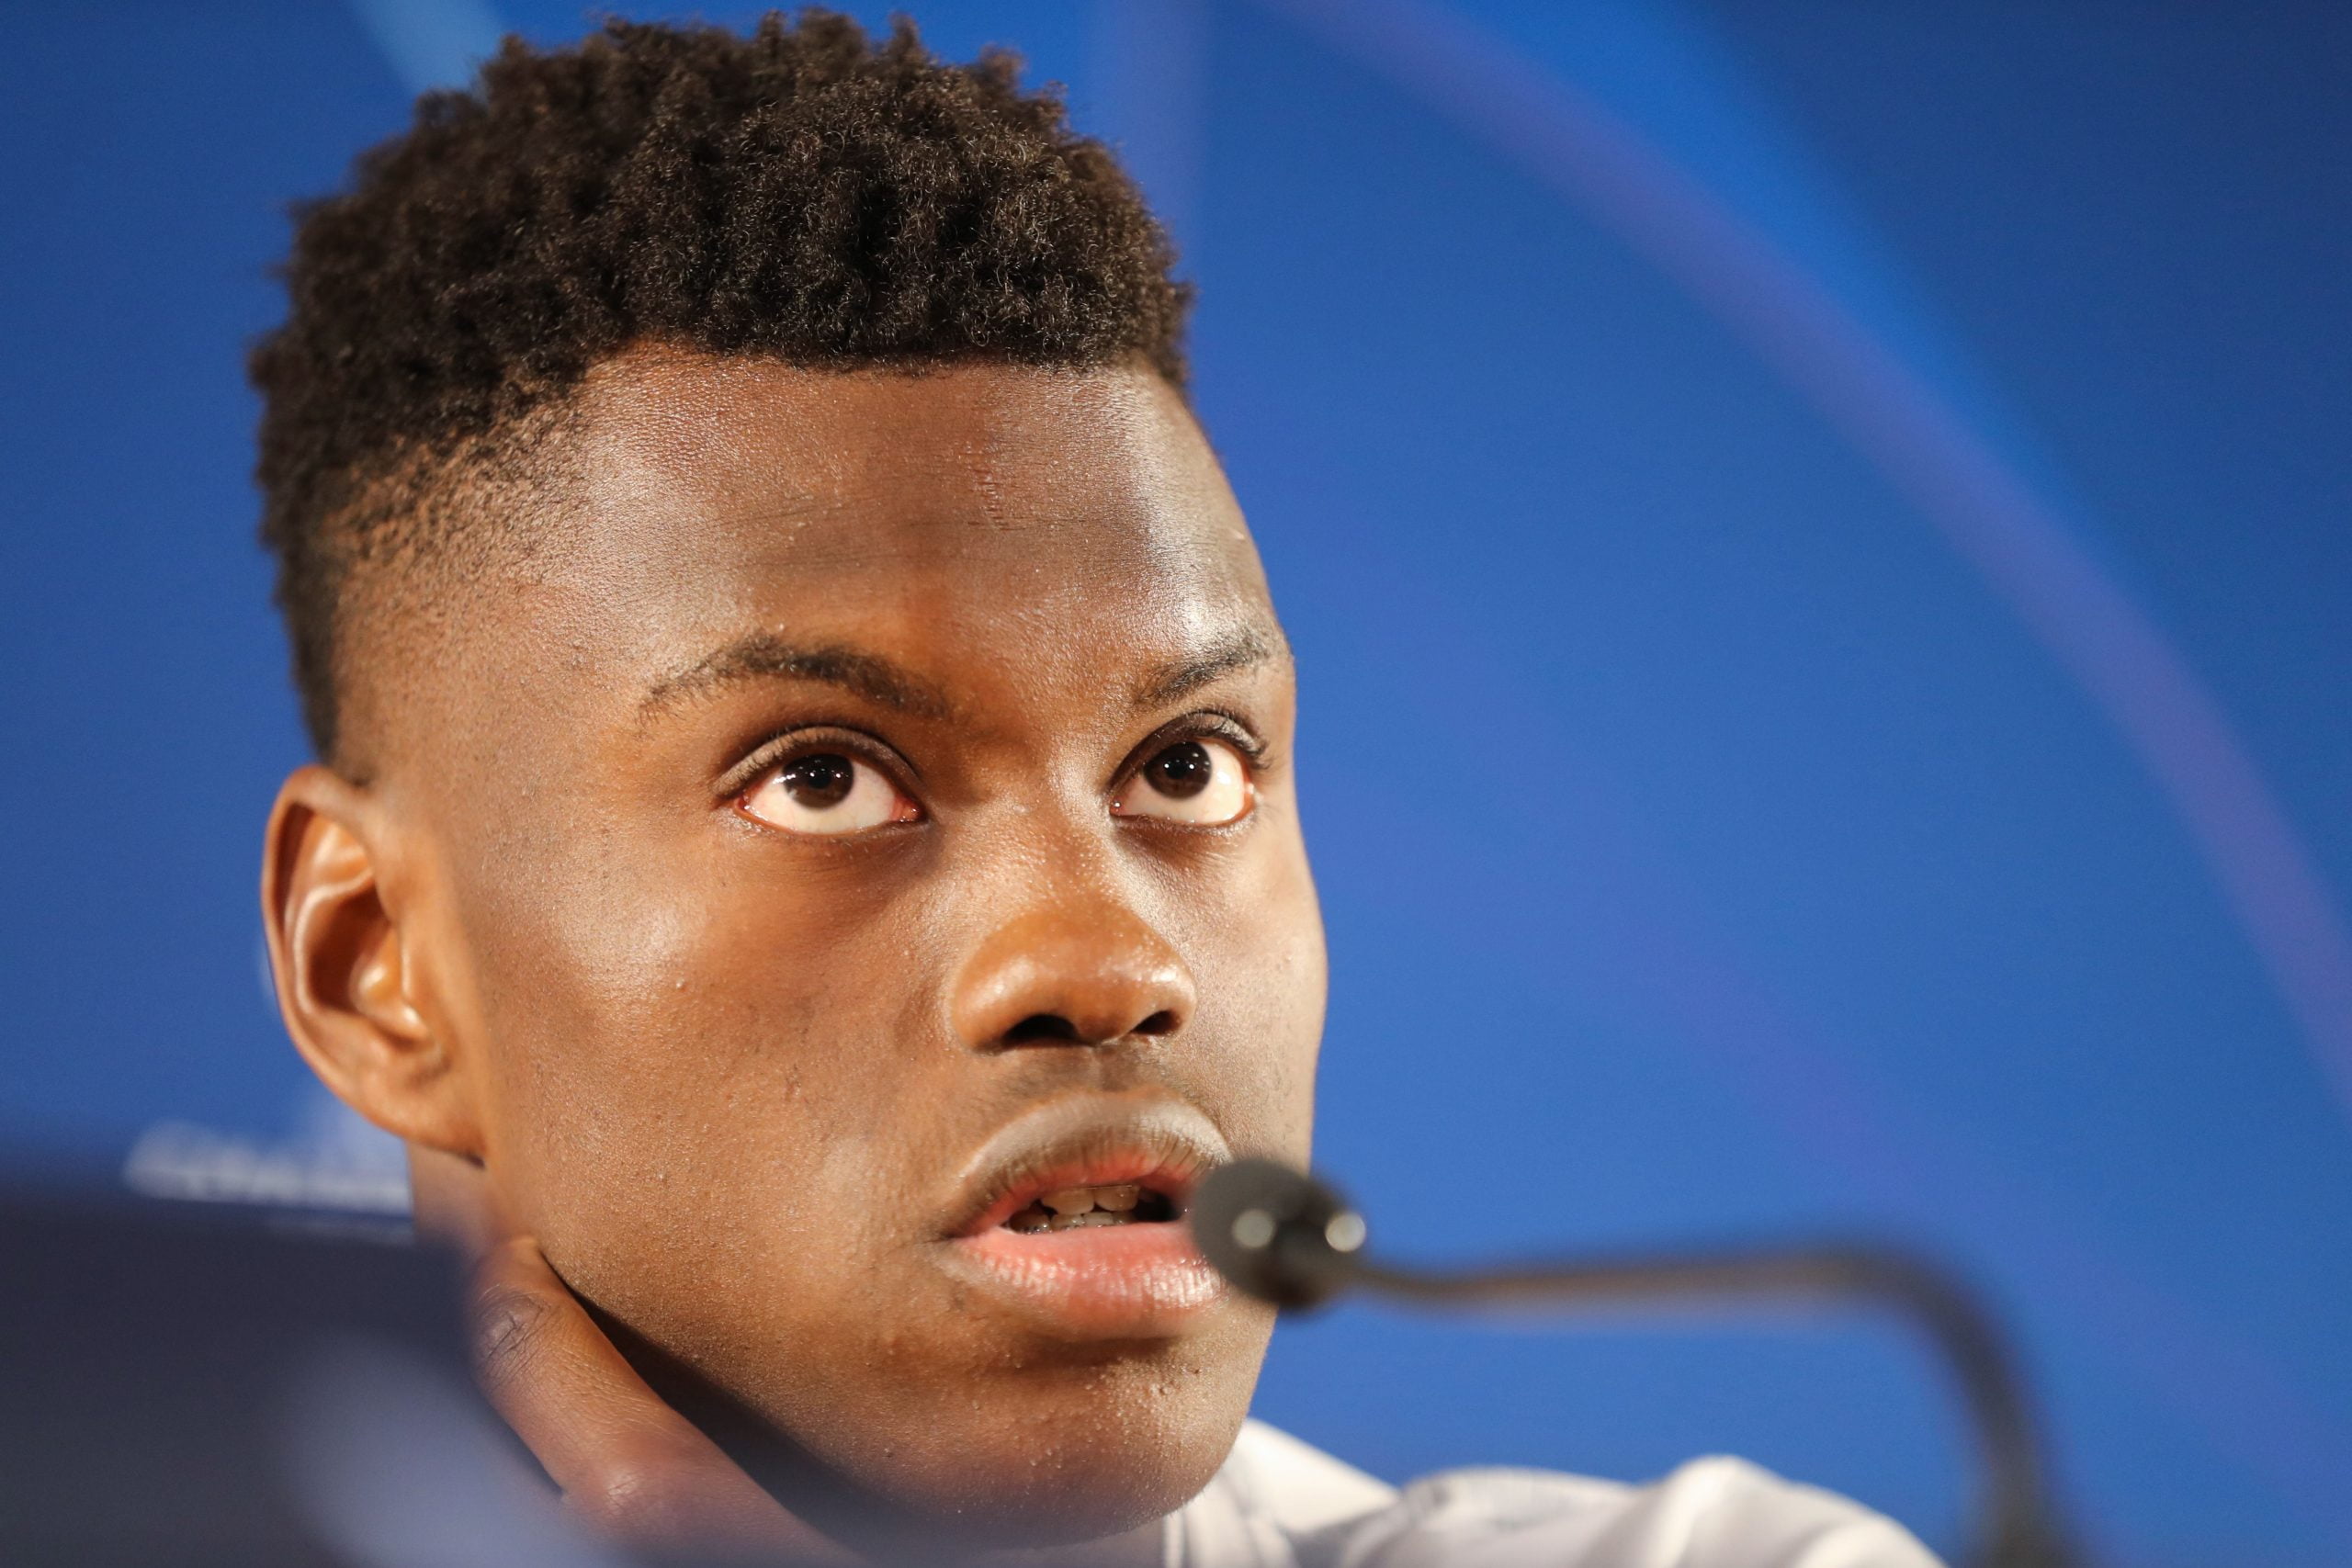 Monaco's French defender Benoit Badiashile Mukinayi speaks during a press conference on December 10, 2018, in Monaco  on the eve of the UEFA Champions League football match between AS Monaco and Dortmund in Monaco. (Photo by VALERY HACHE / AFP)        (Photo credit should read VALERY HACHE/AFP/Getty Images)